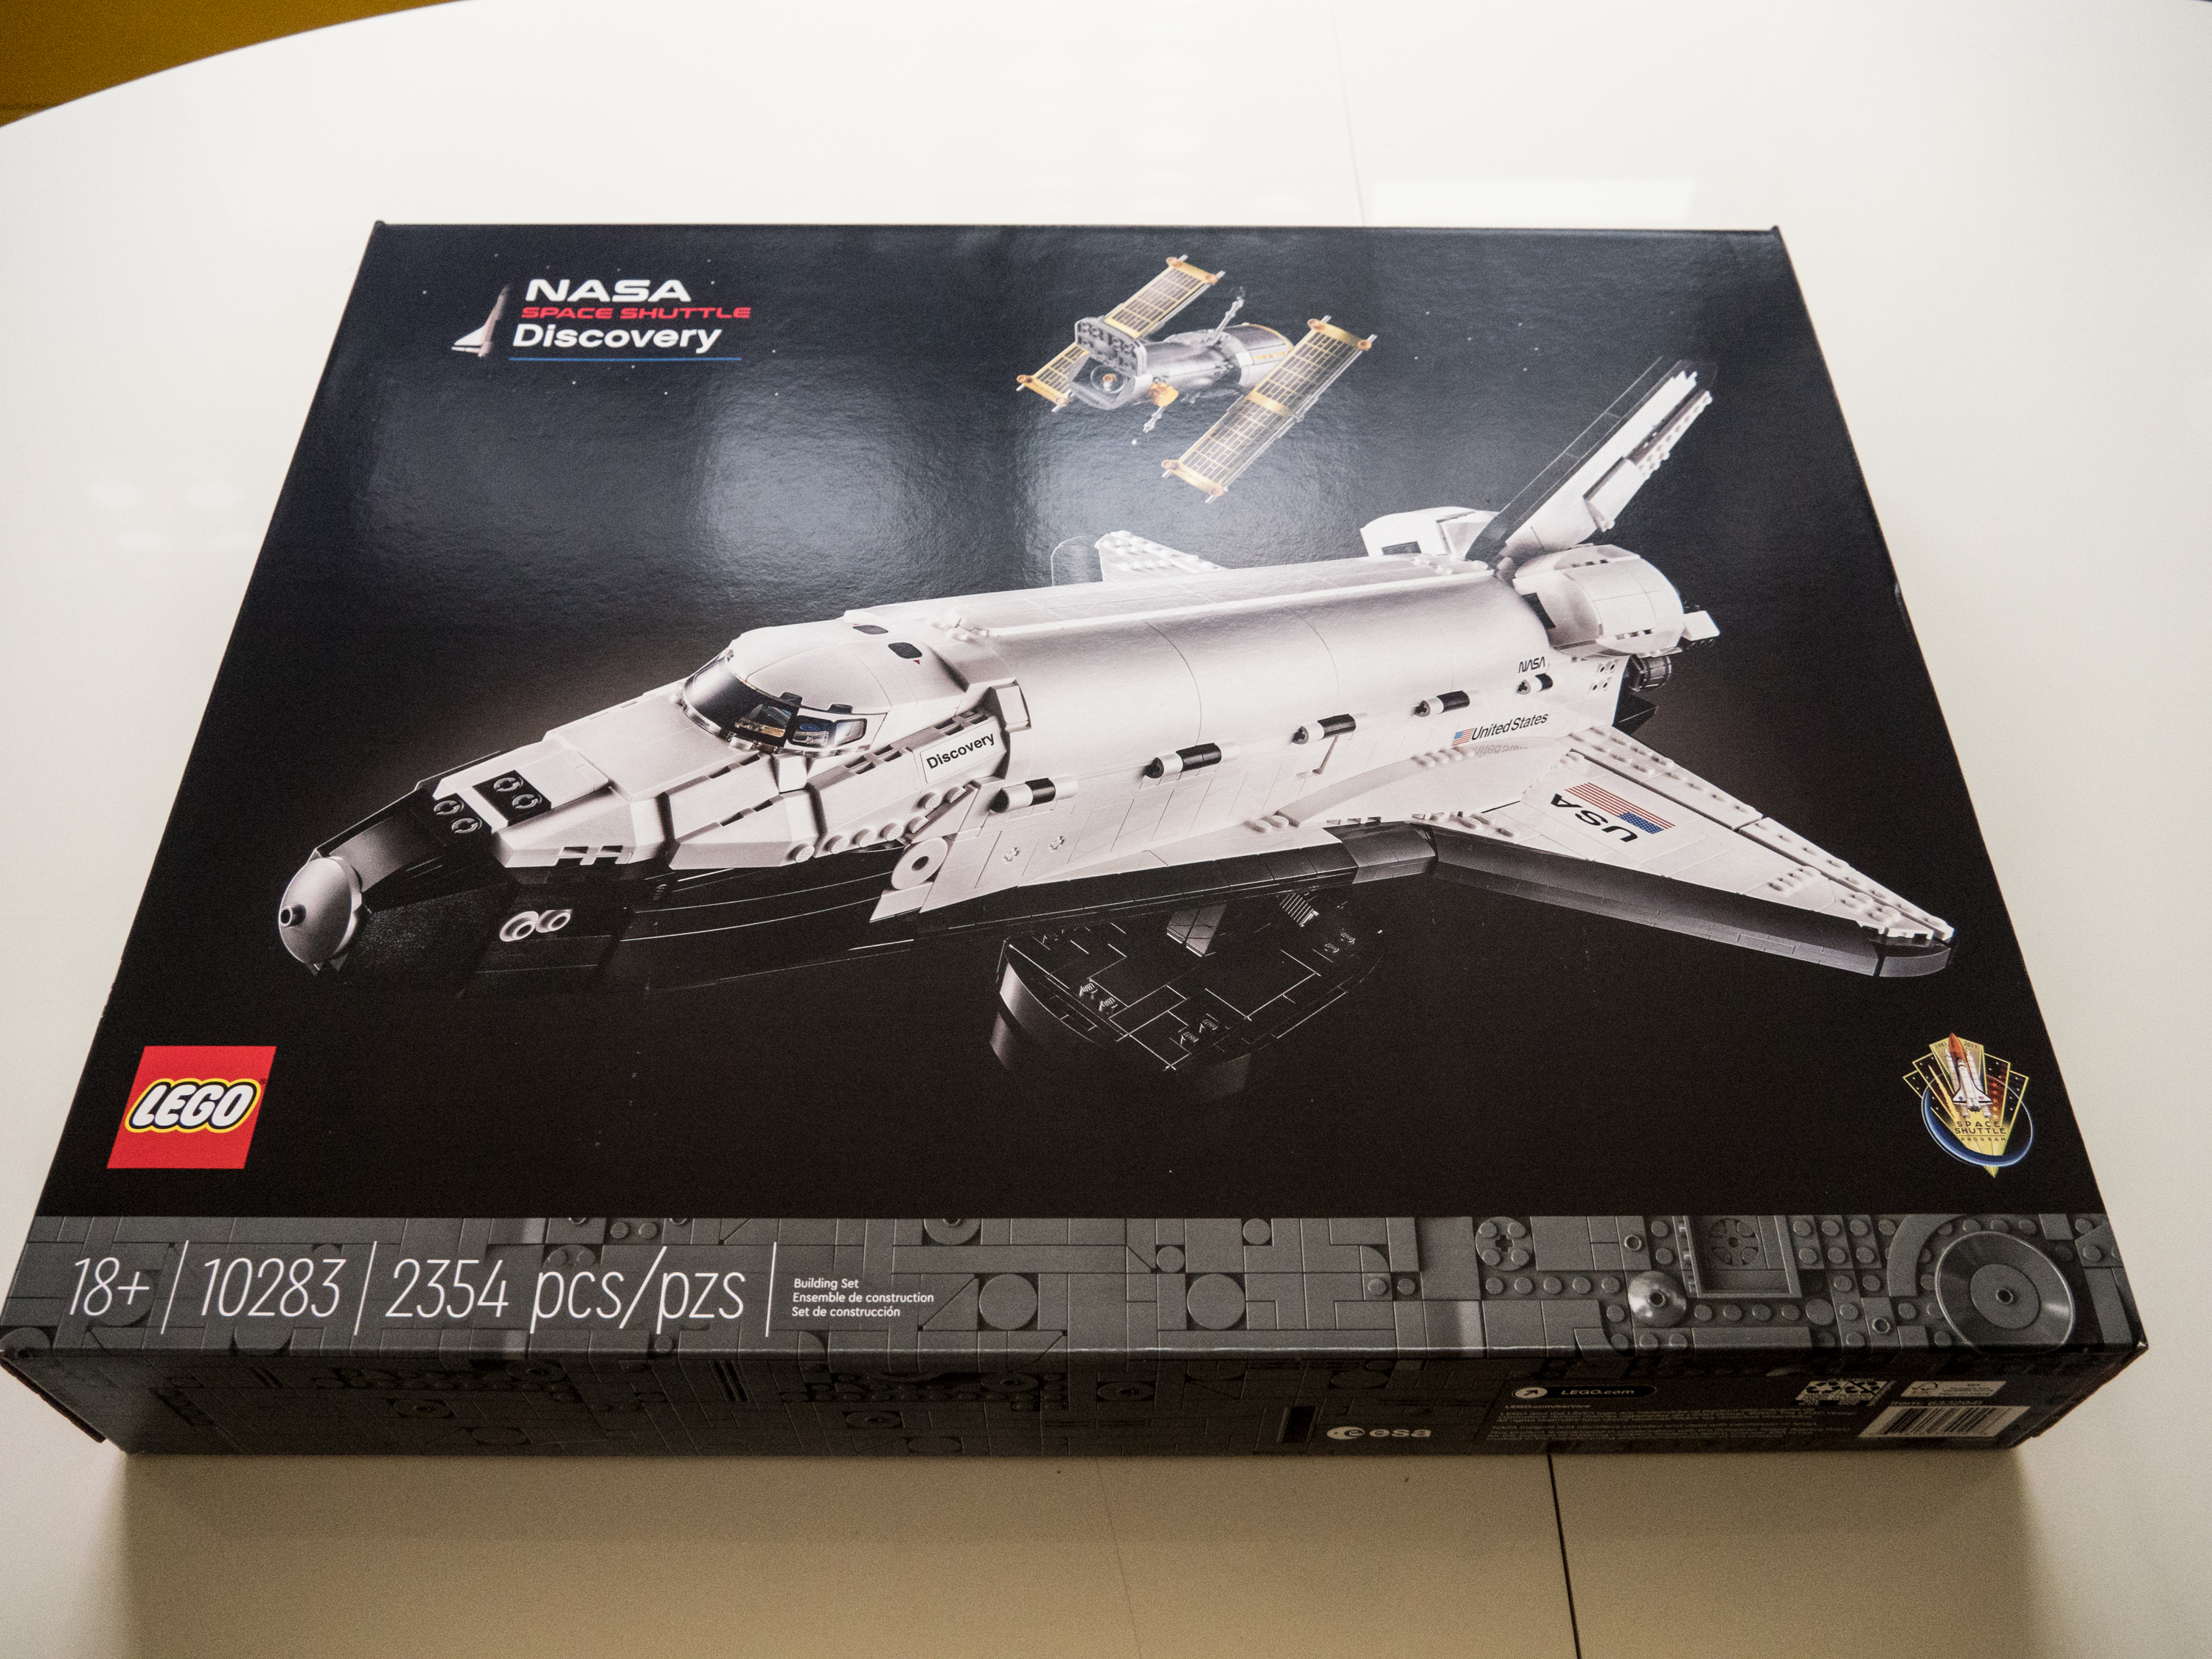 Lego has a new 2,354-piece NASA Space Shuttle set, and it's